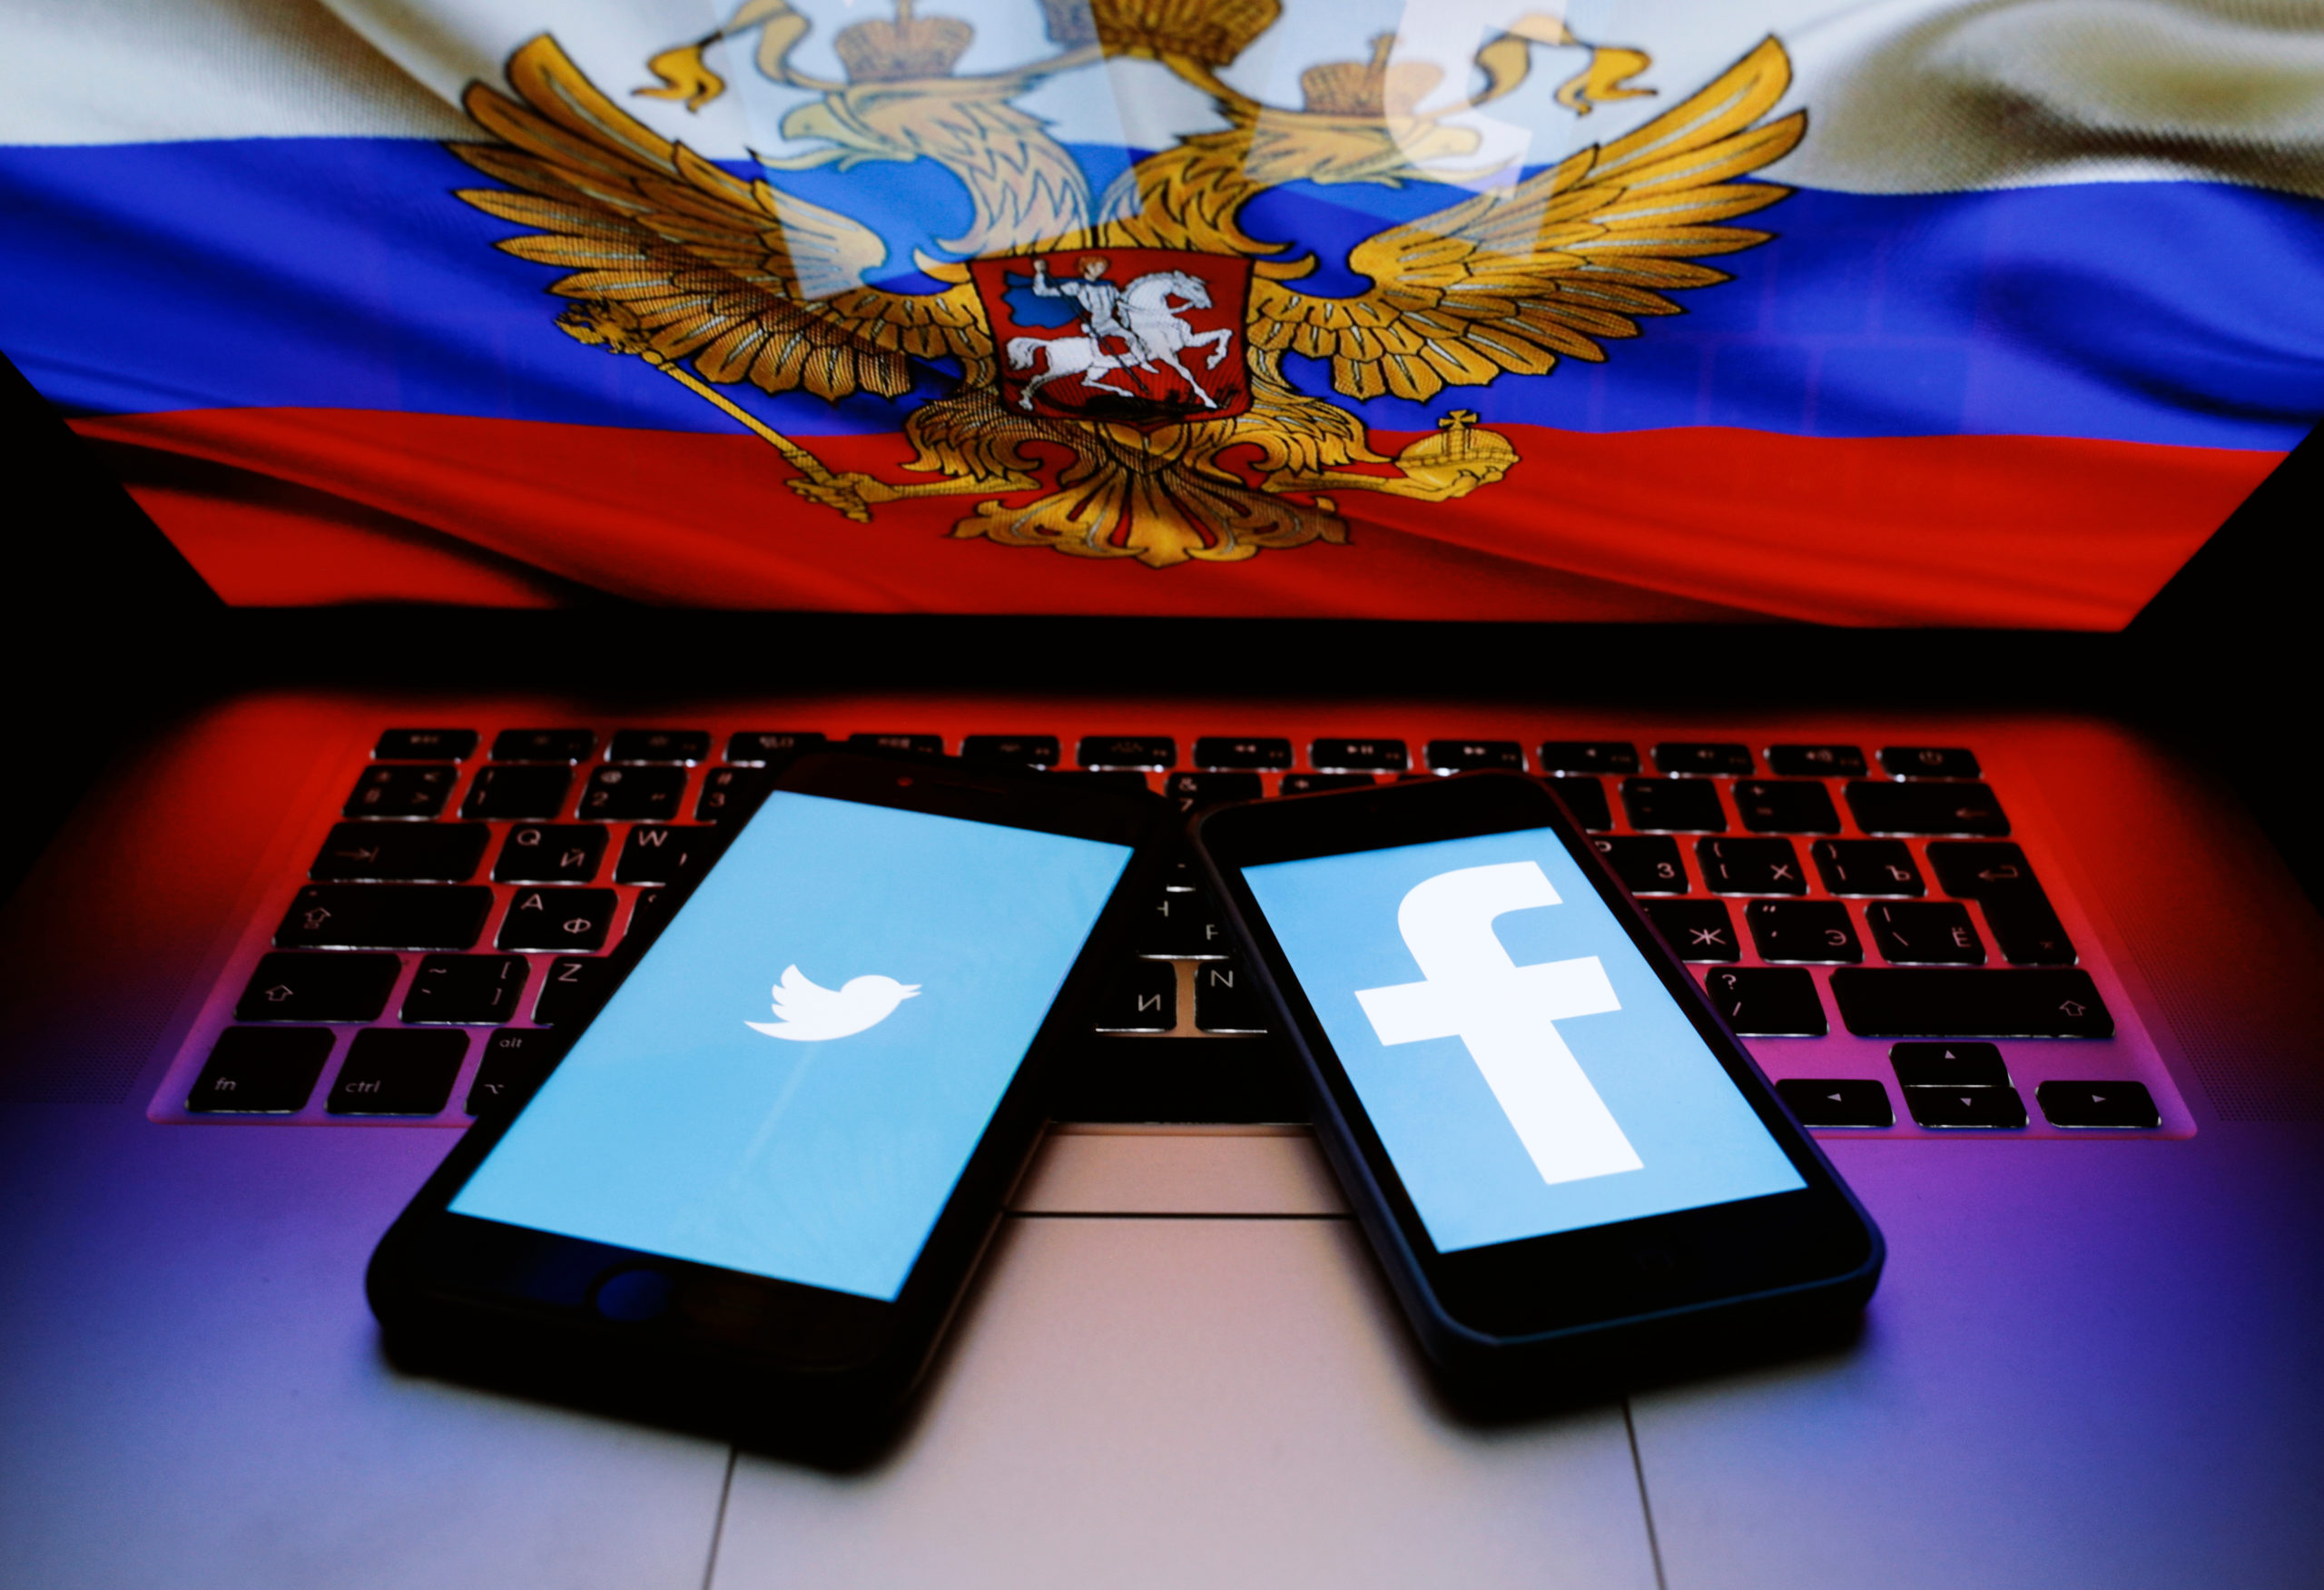 Russia block access to Facebook and Twitter